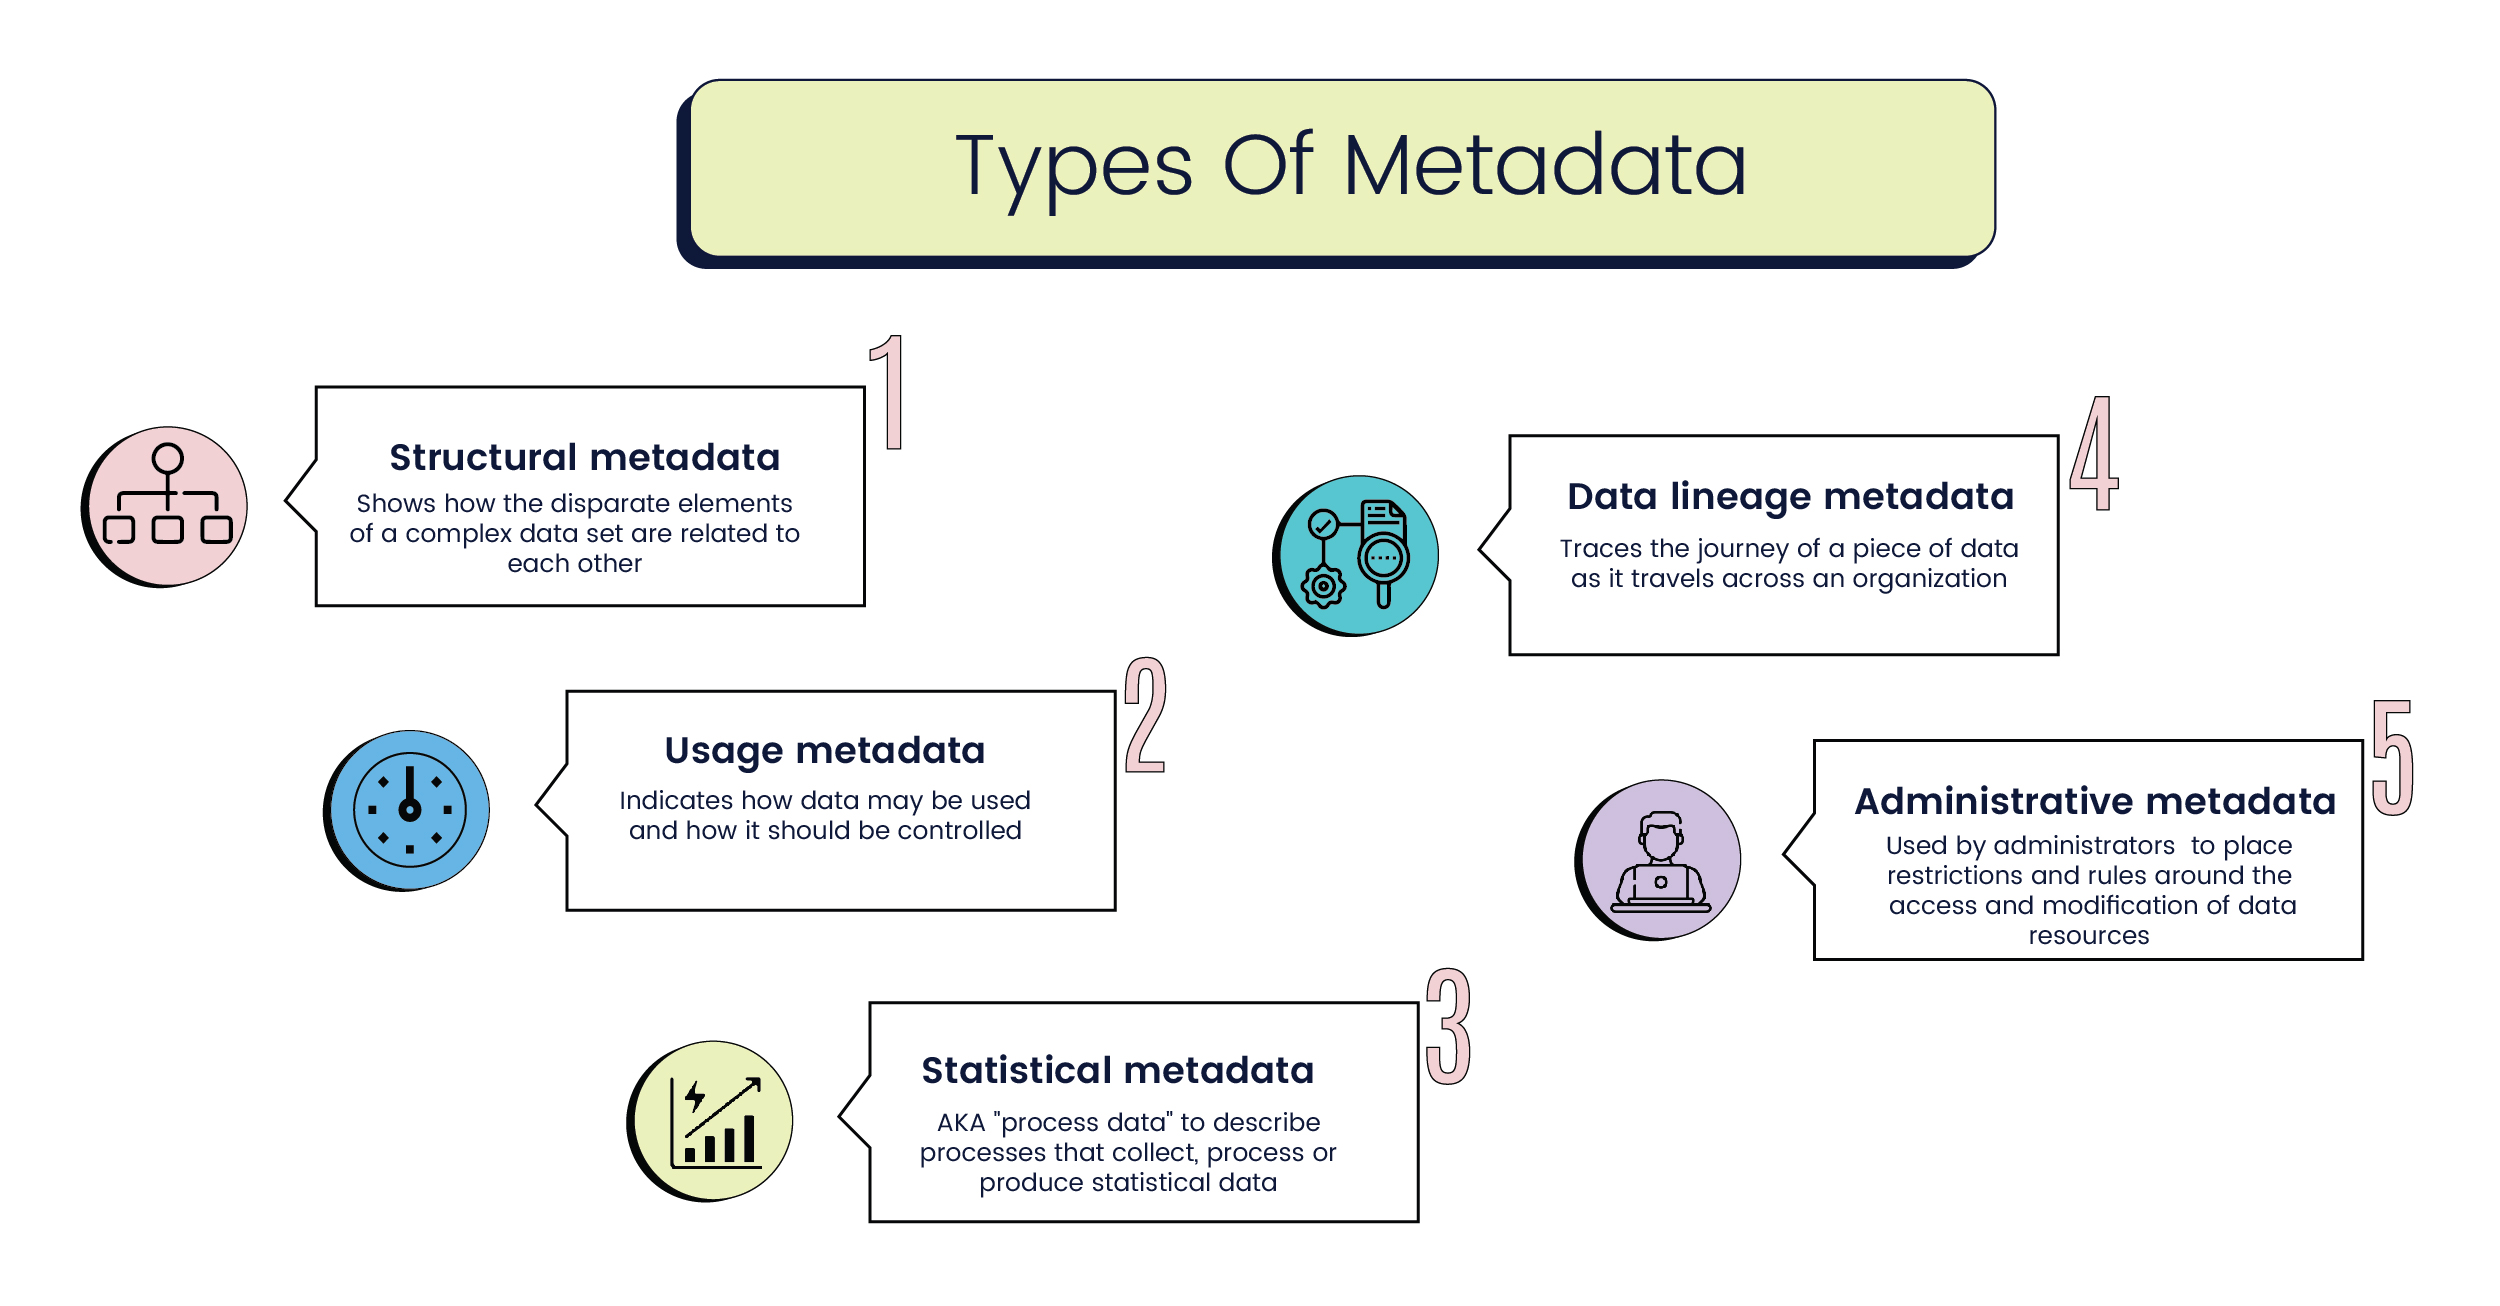 The different types of metadata